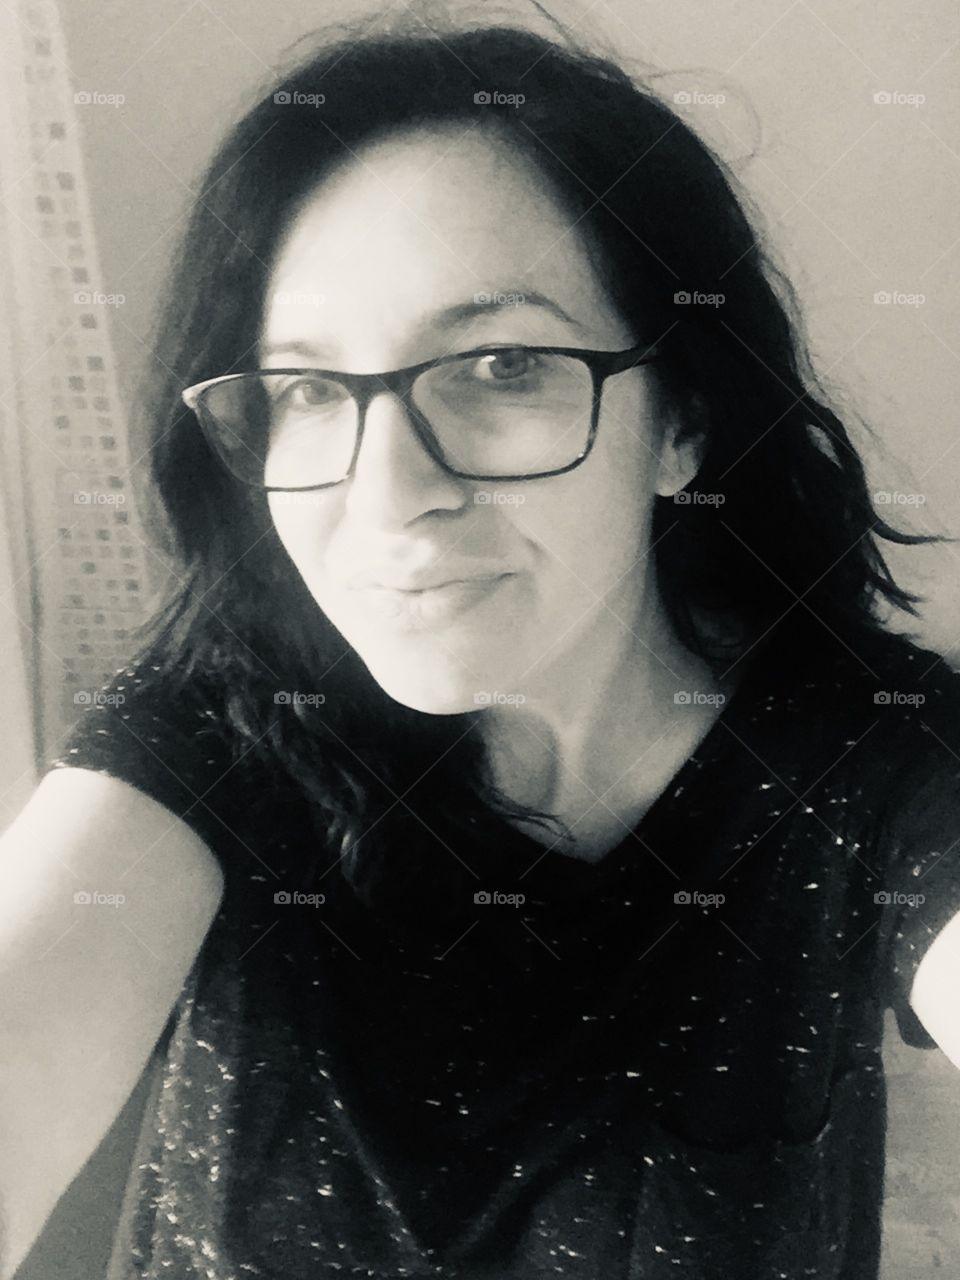 Woman selfie black and white